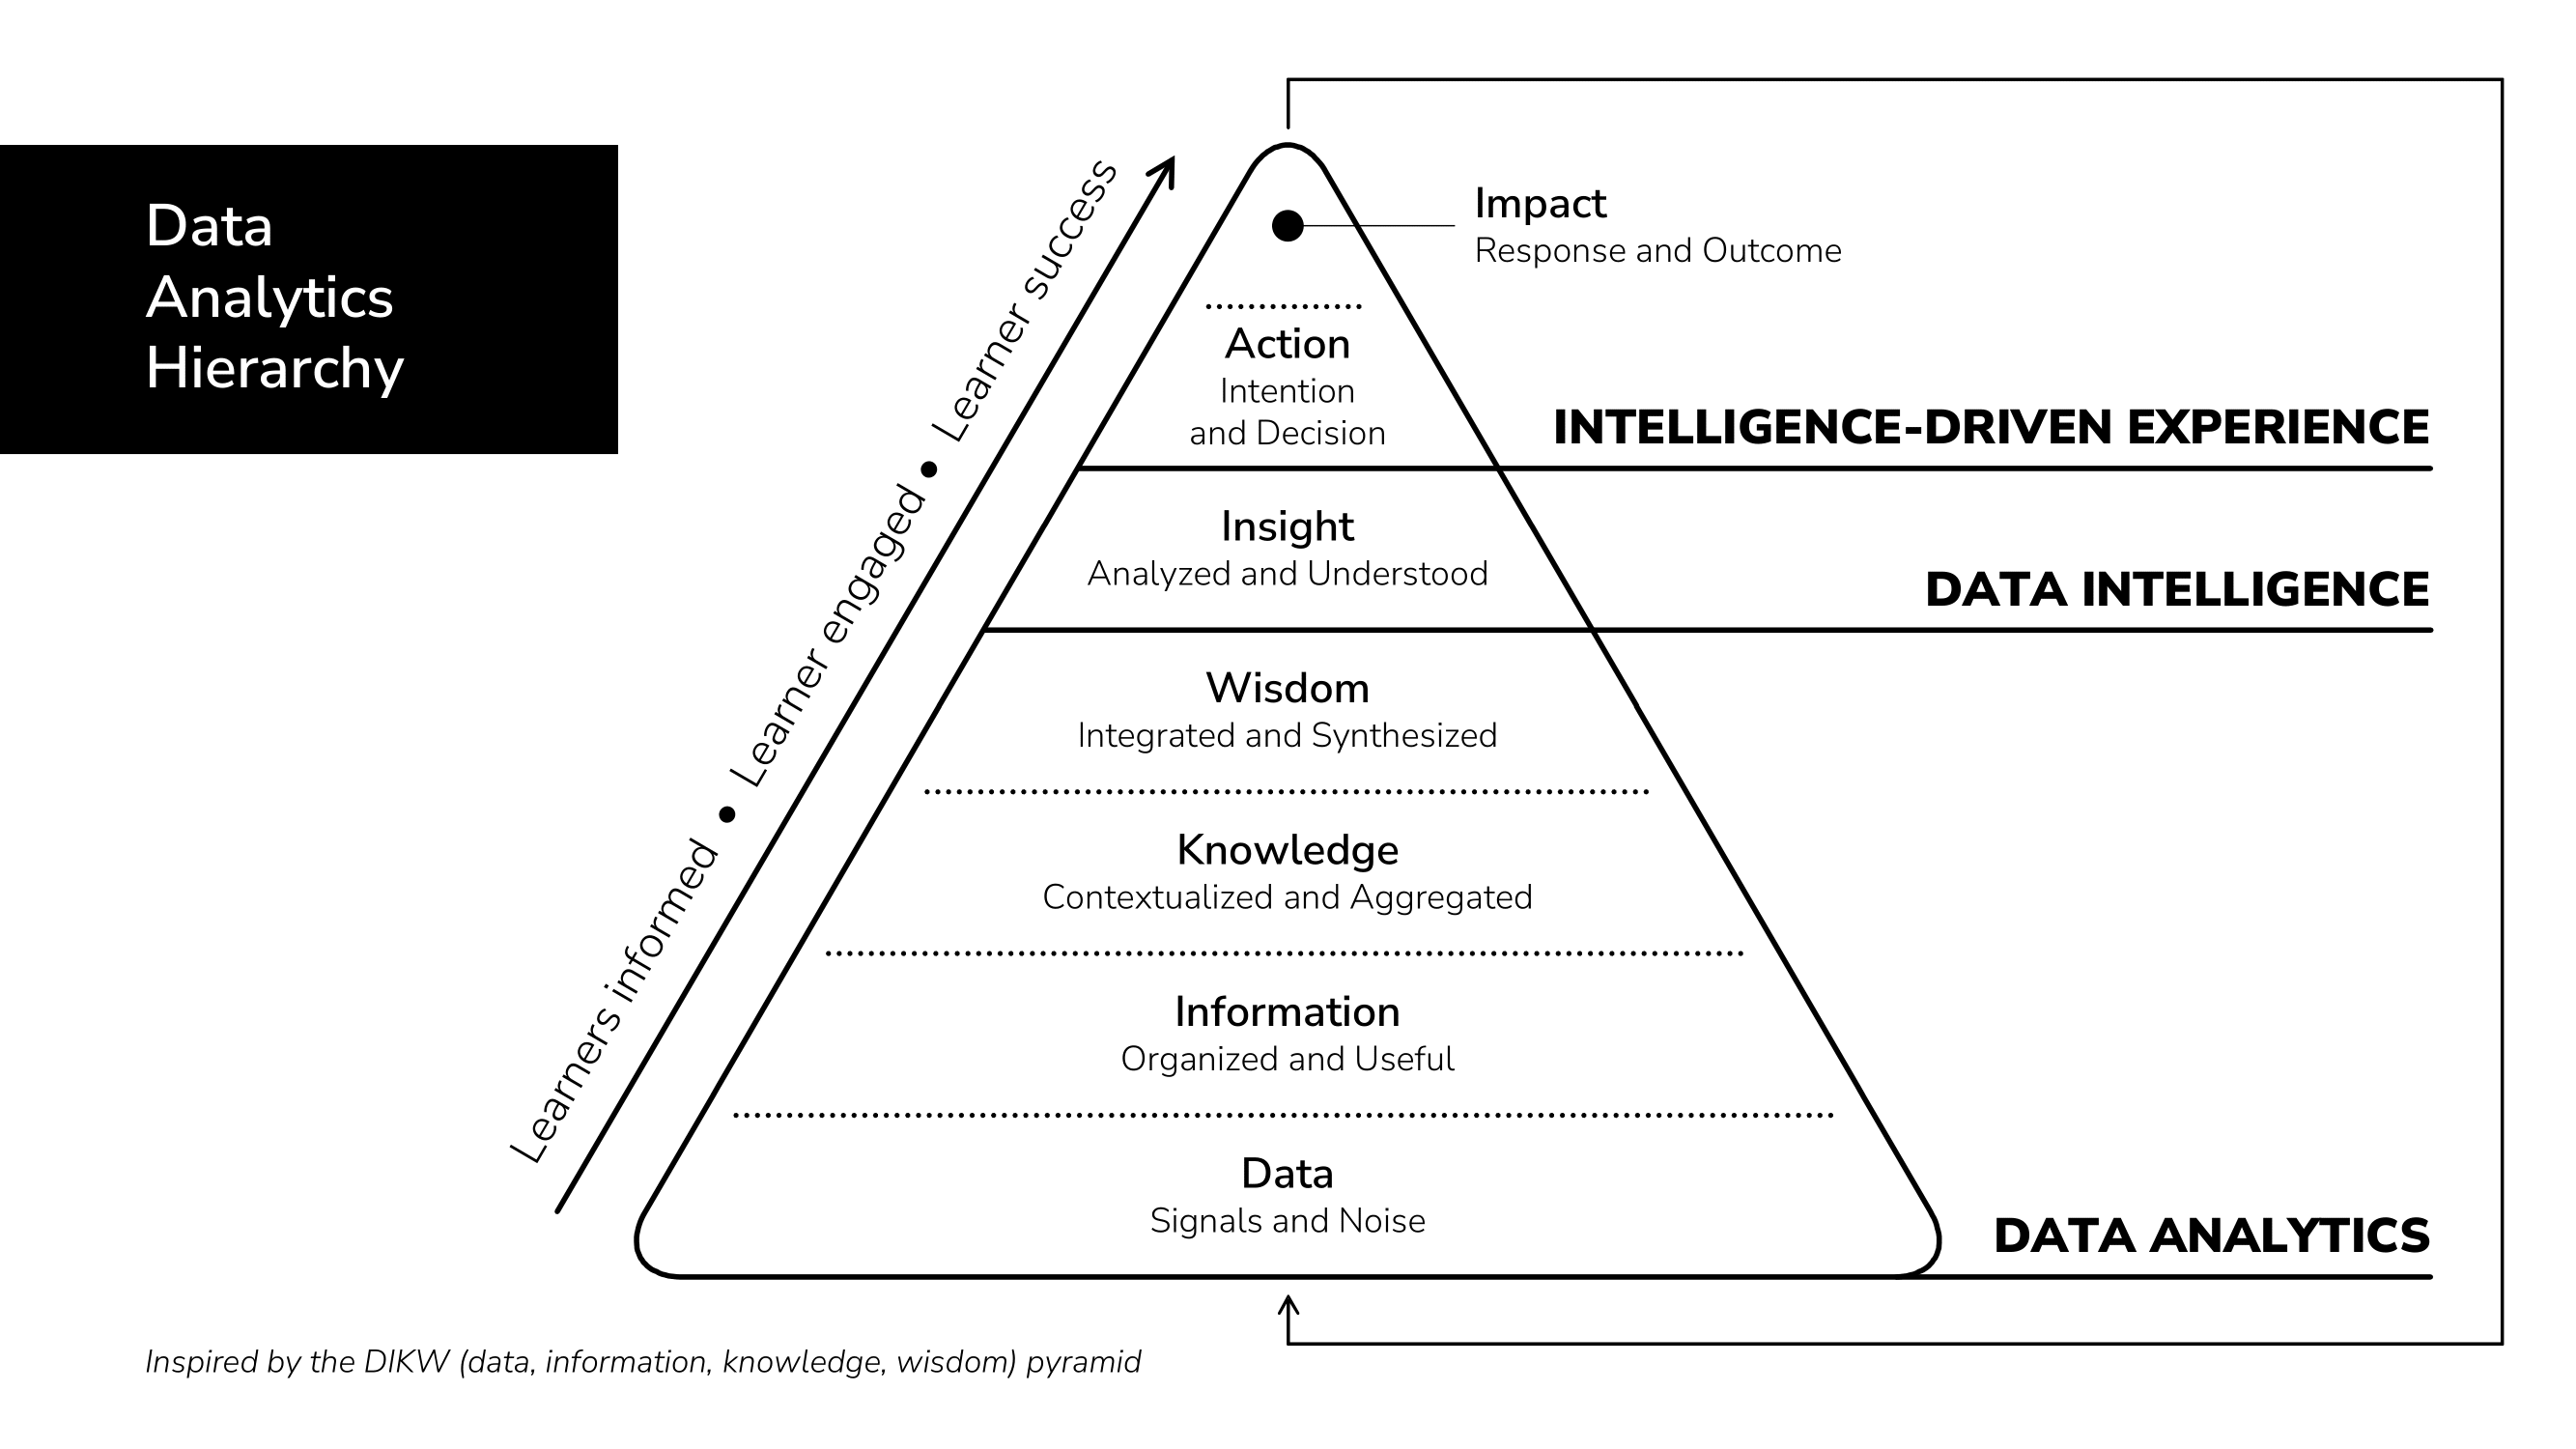 Figure 1: A Data Analytics Framework Inspired by the DIKW Pyramid